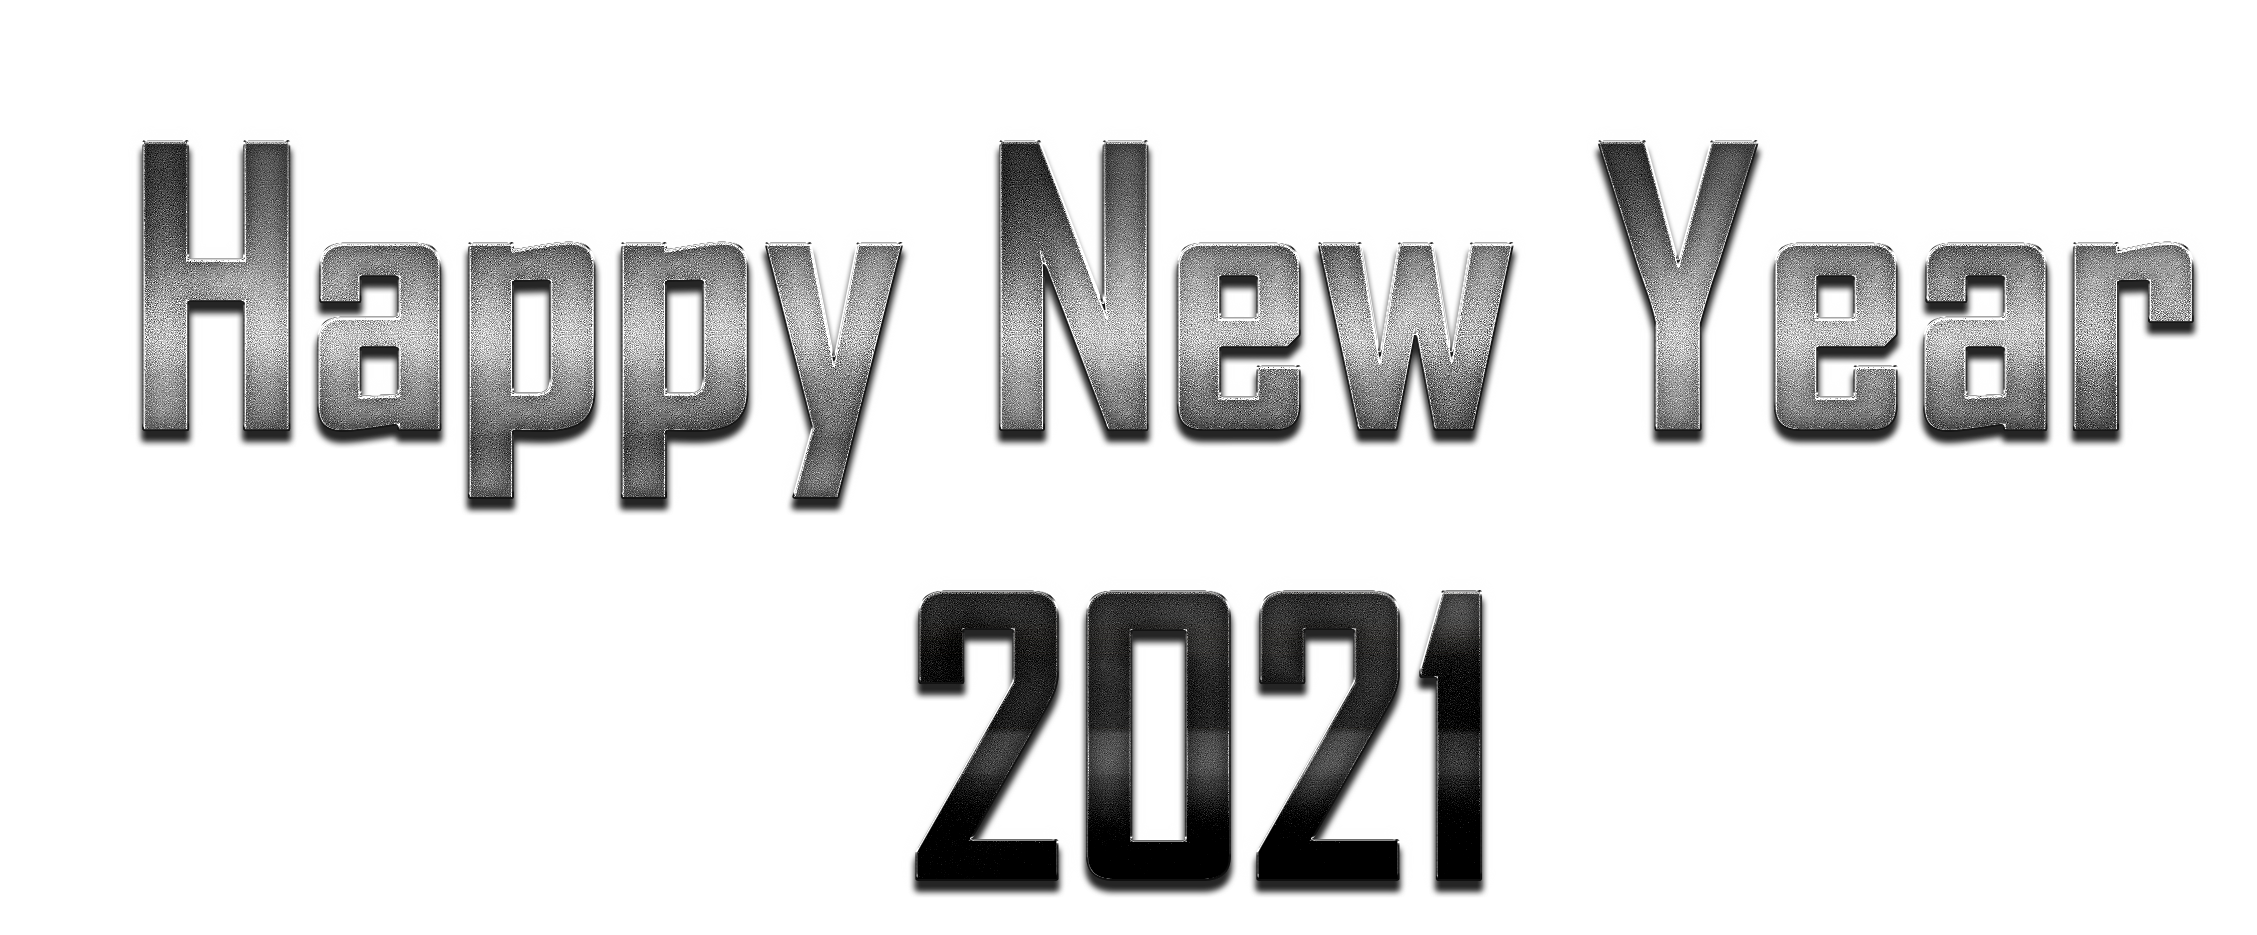 Happy New Year 2021 Free PNG Image